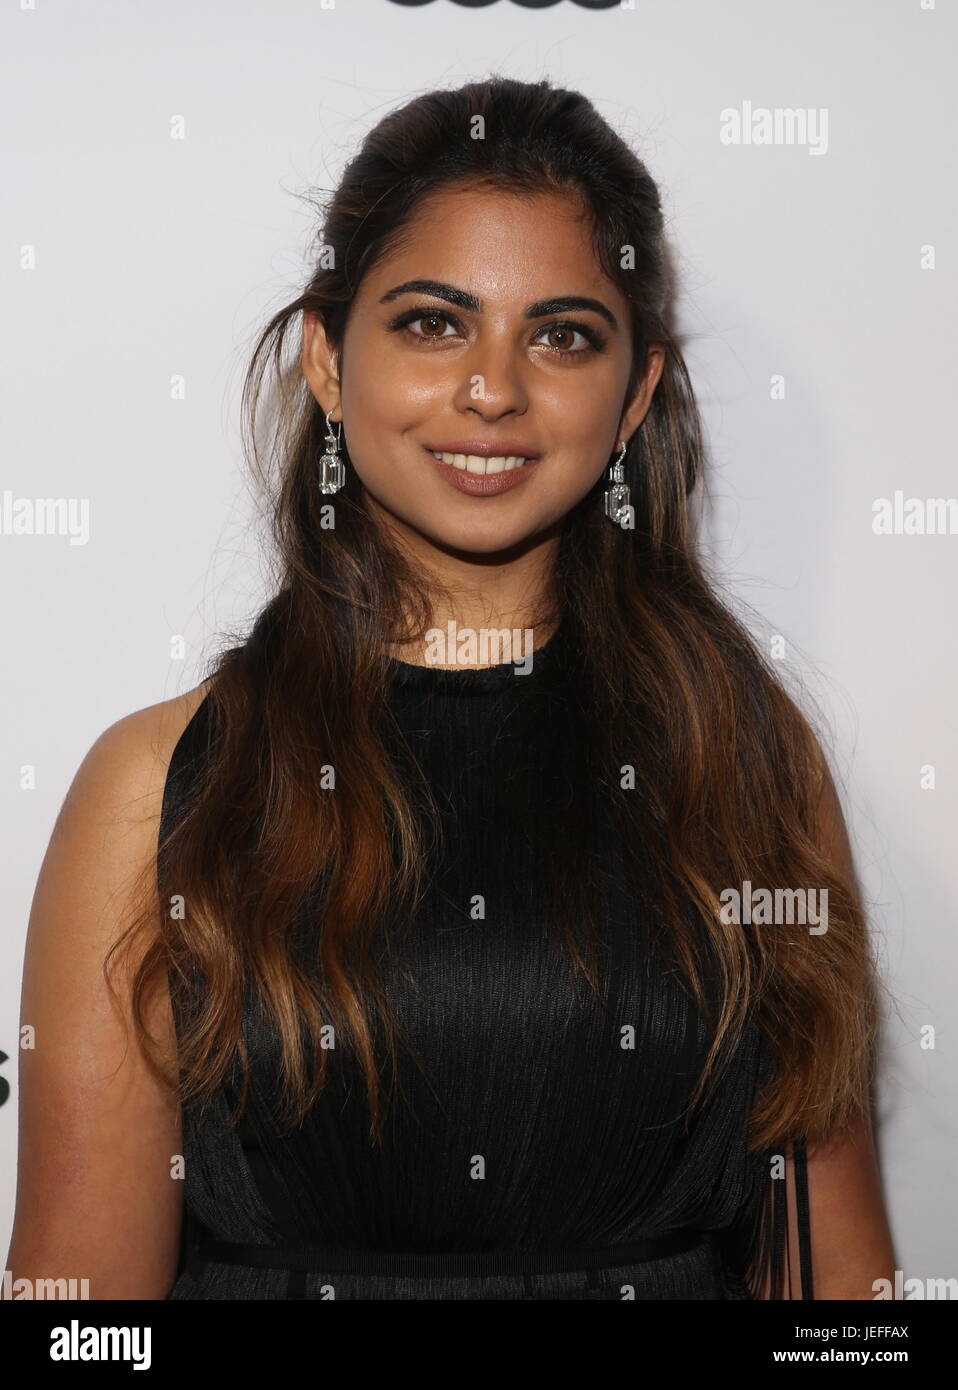 The Whitney Museum Annual Studio Party - Arrivals  Featuring: Isha Ambani Where: New York, New York, United States When: 23 May 2017 Credit: Derrick Salters/WENN.com Stock Photo